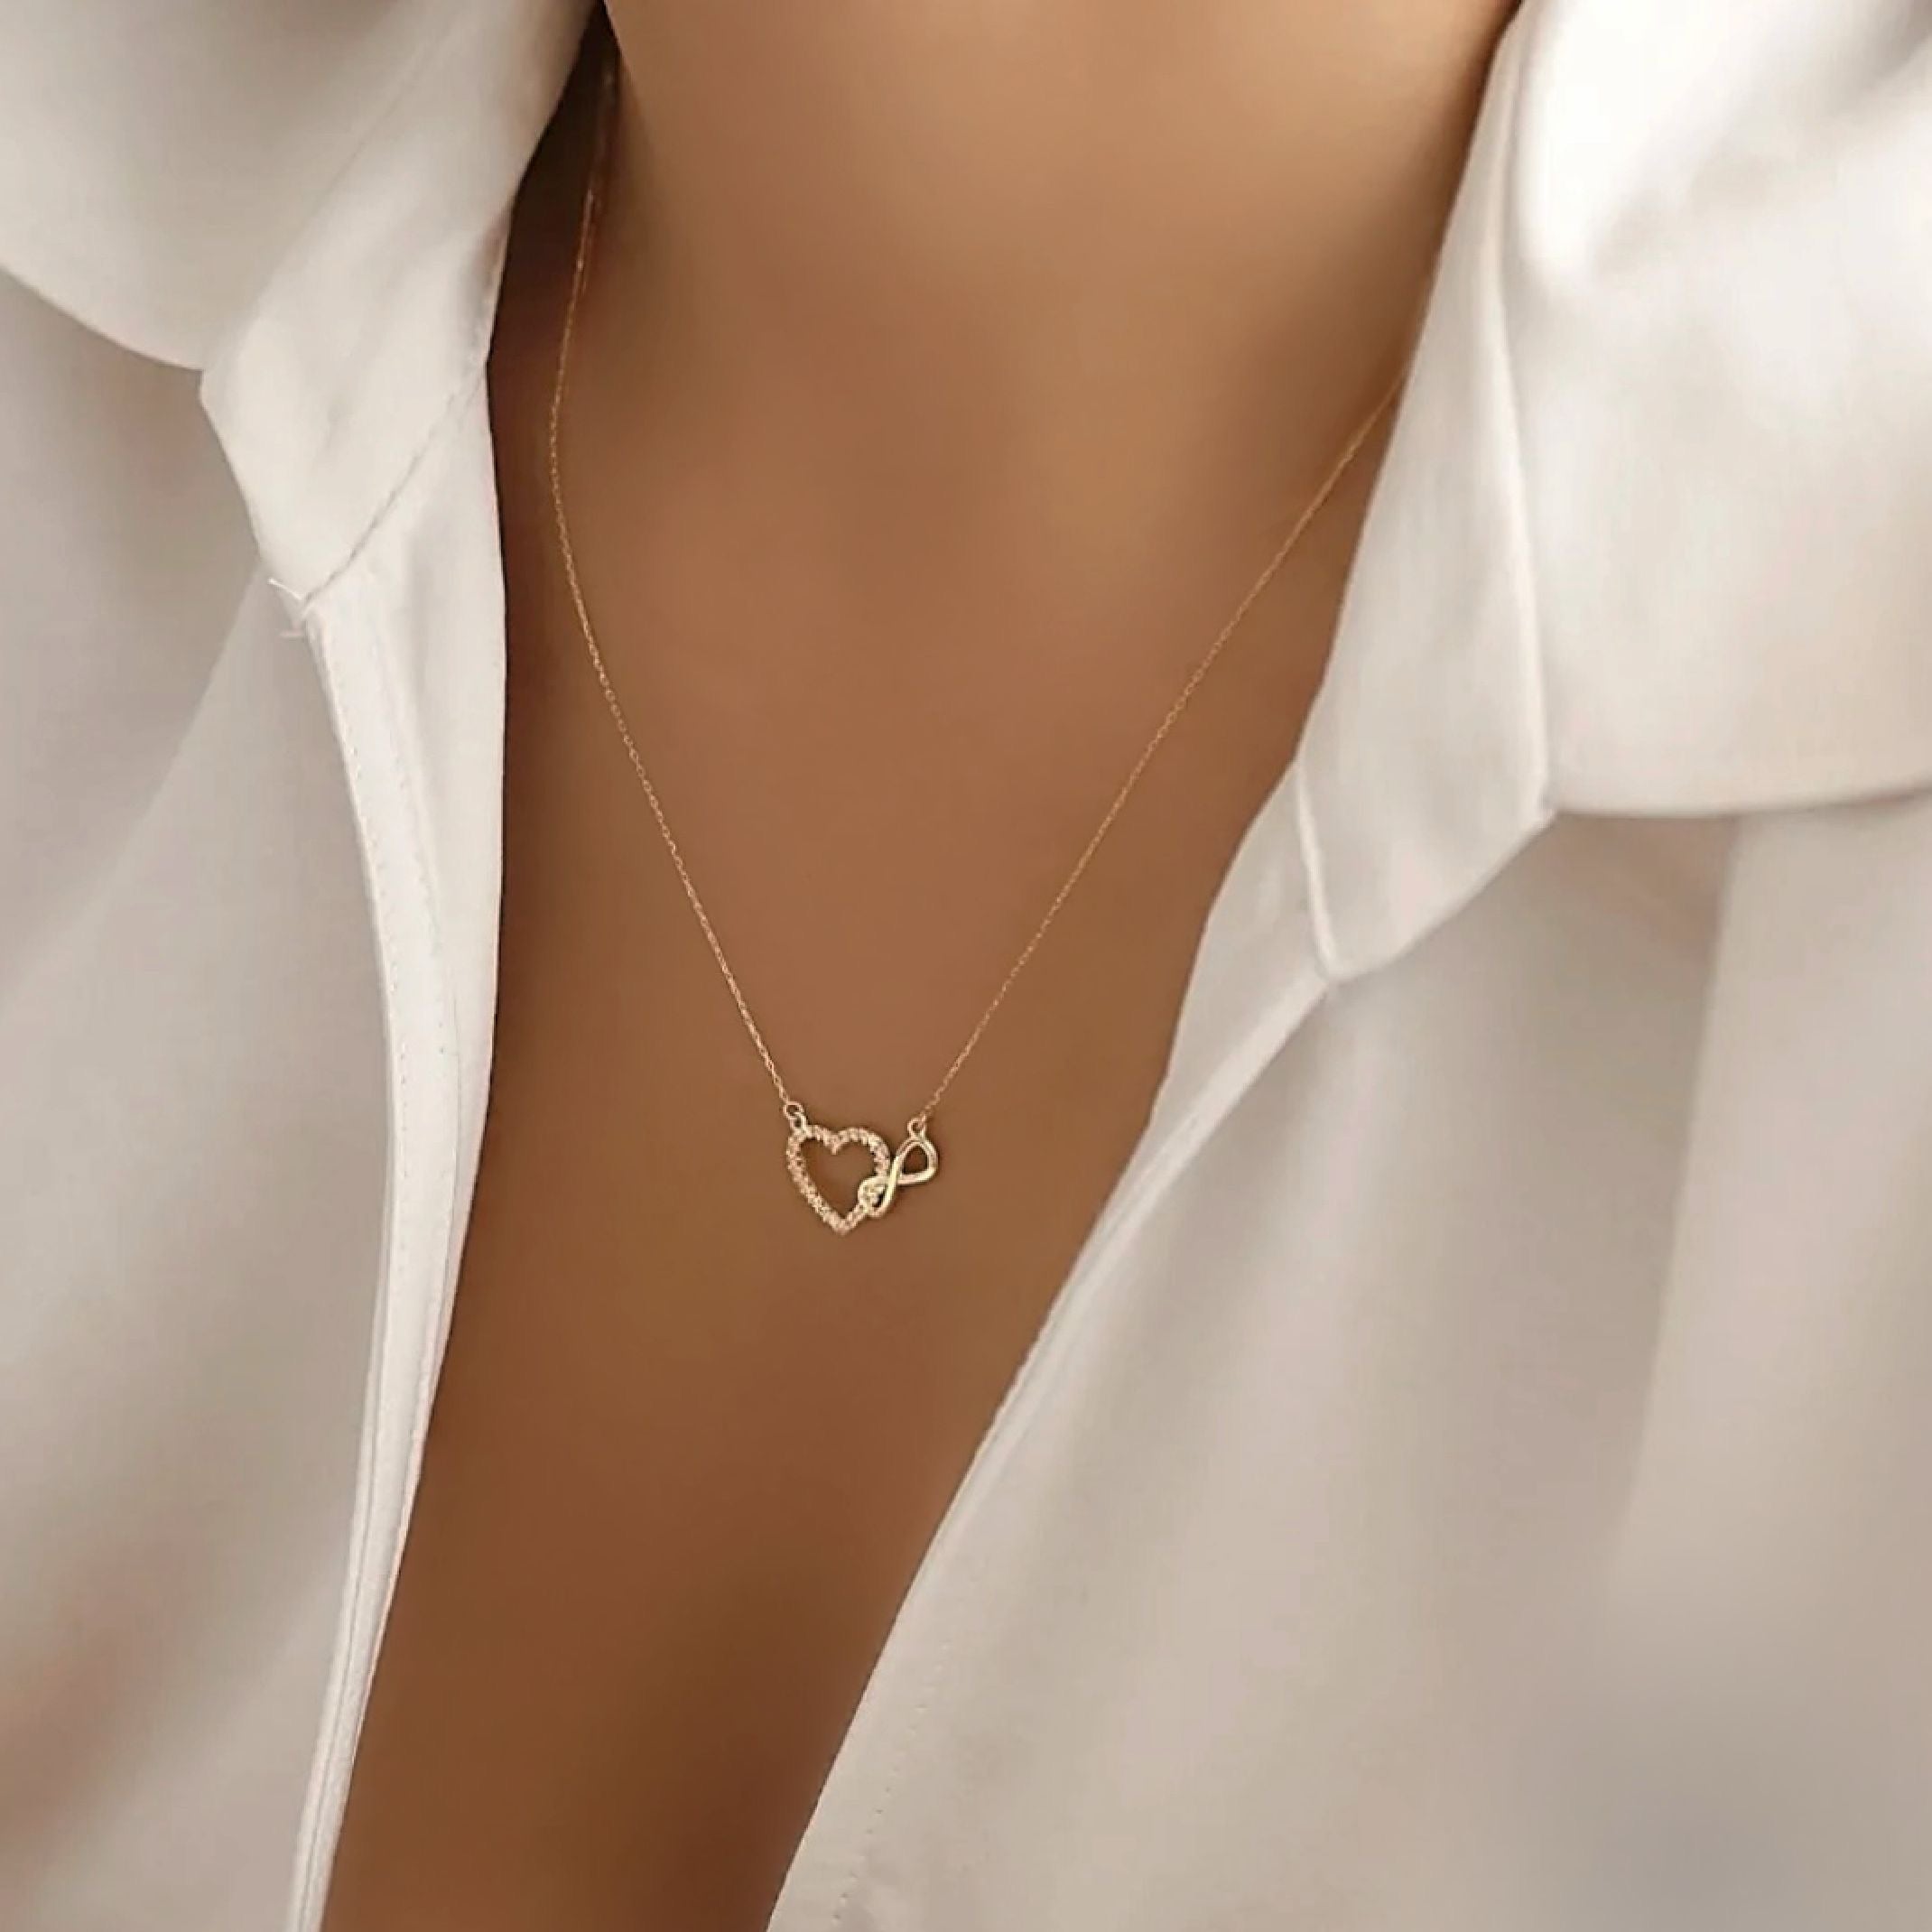 Gold infinity heart necklace 